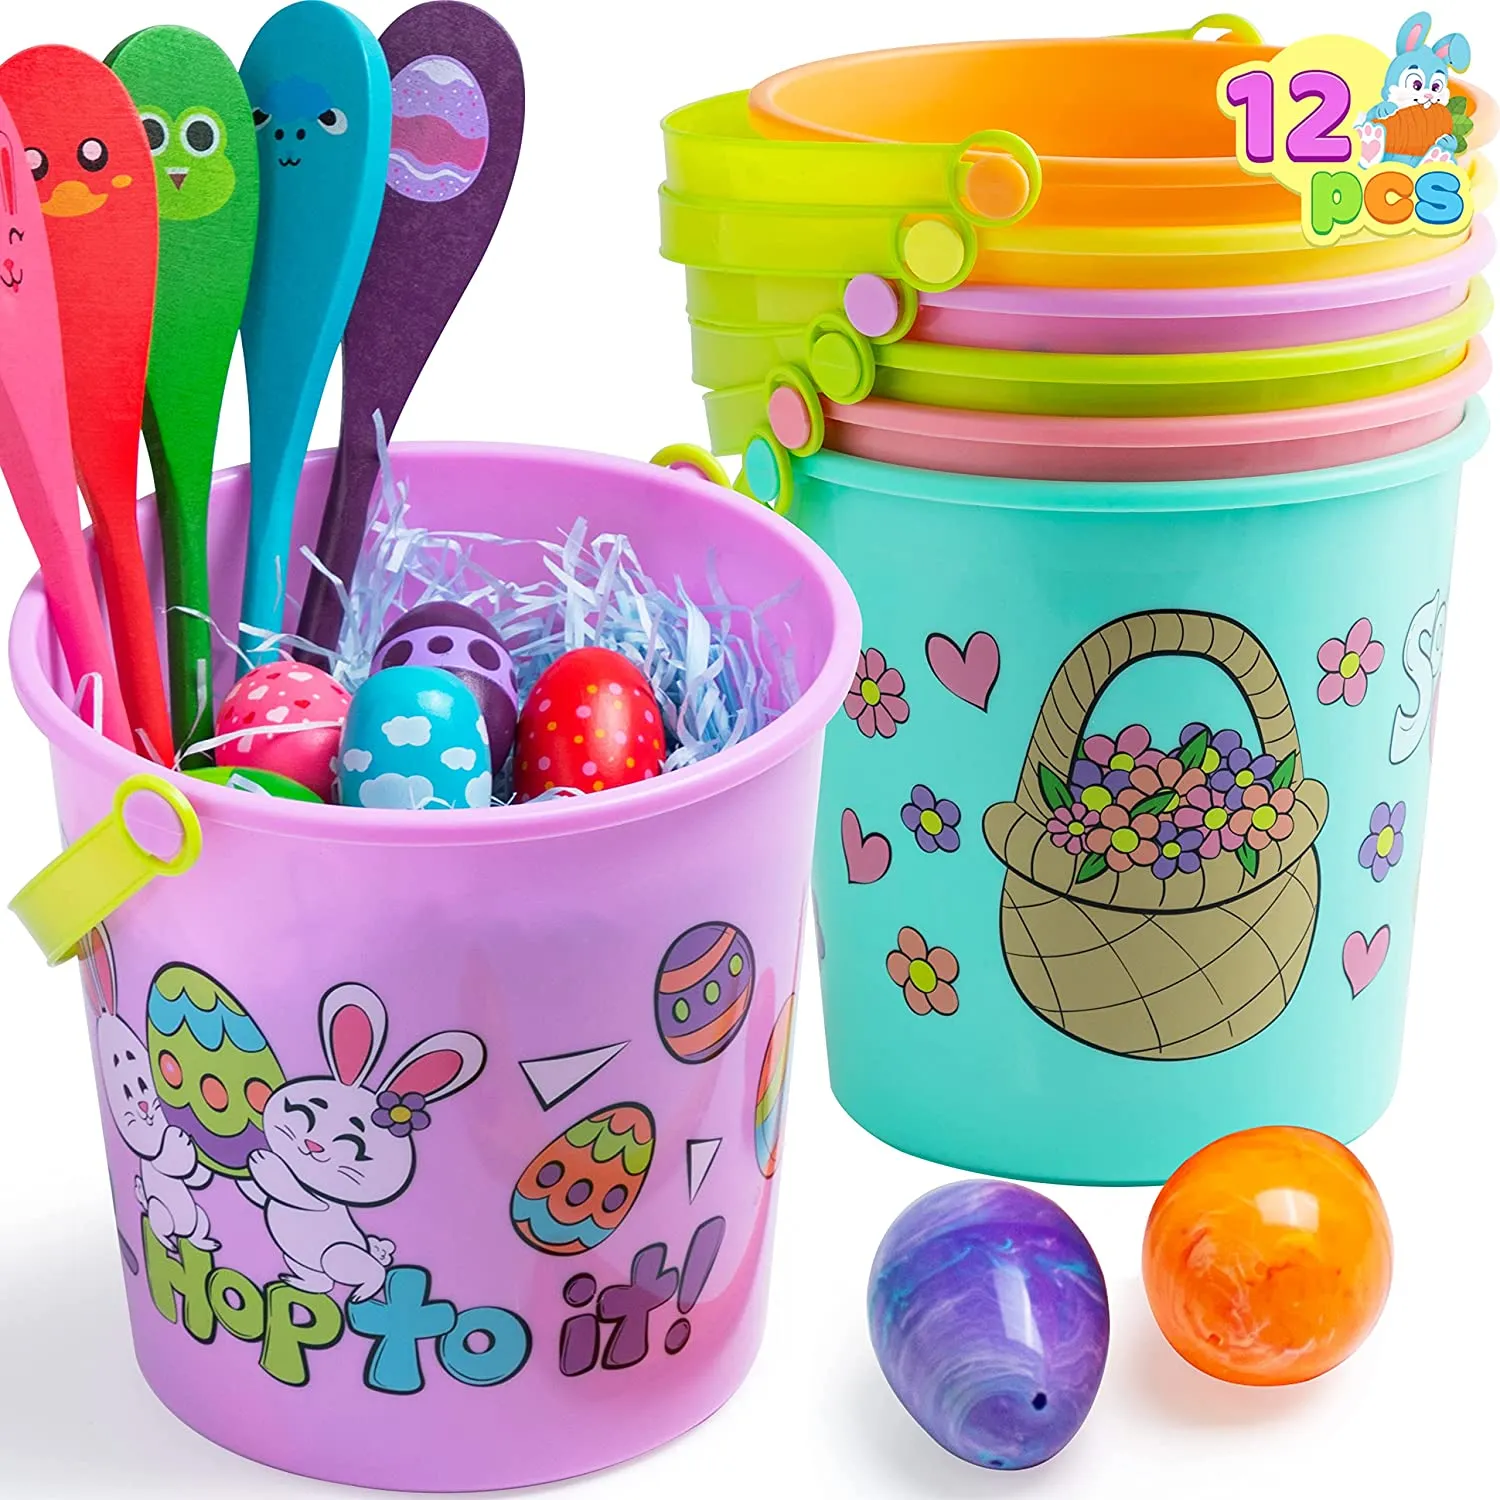 Adorable 6pcs Easter Plastic Buckets with Handles 7in x 7in